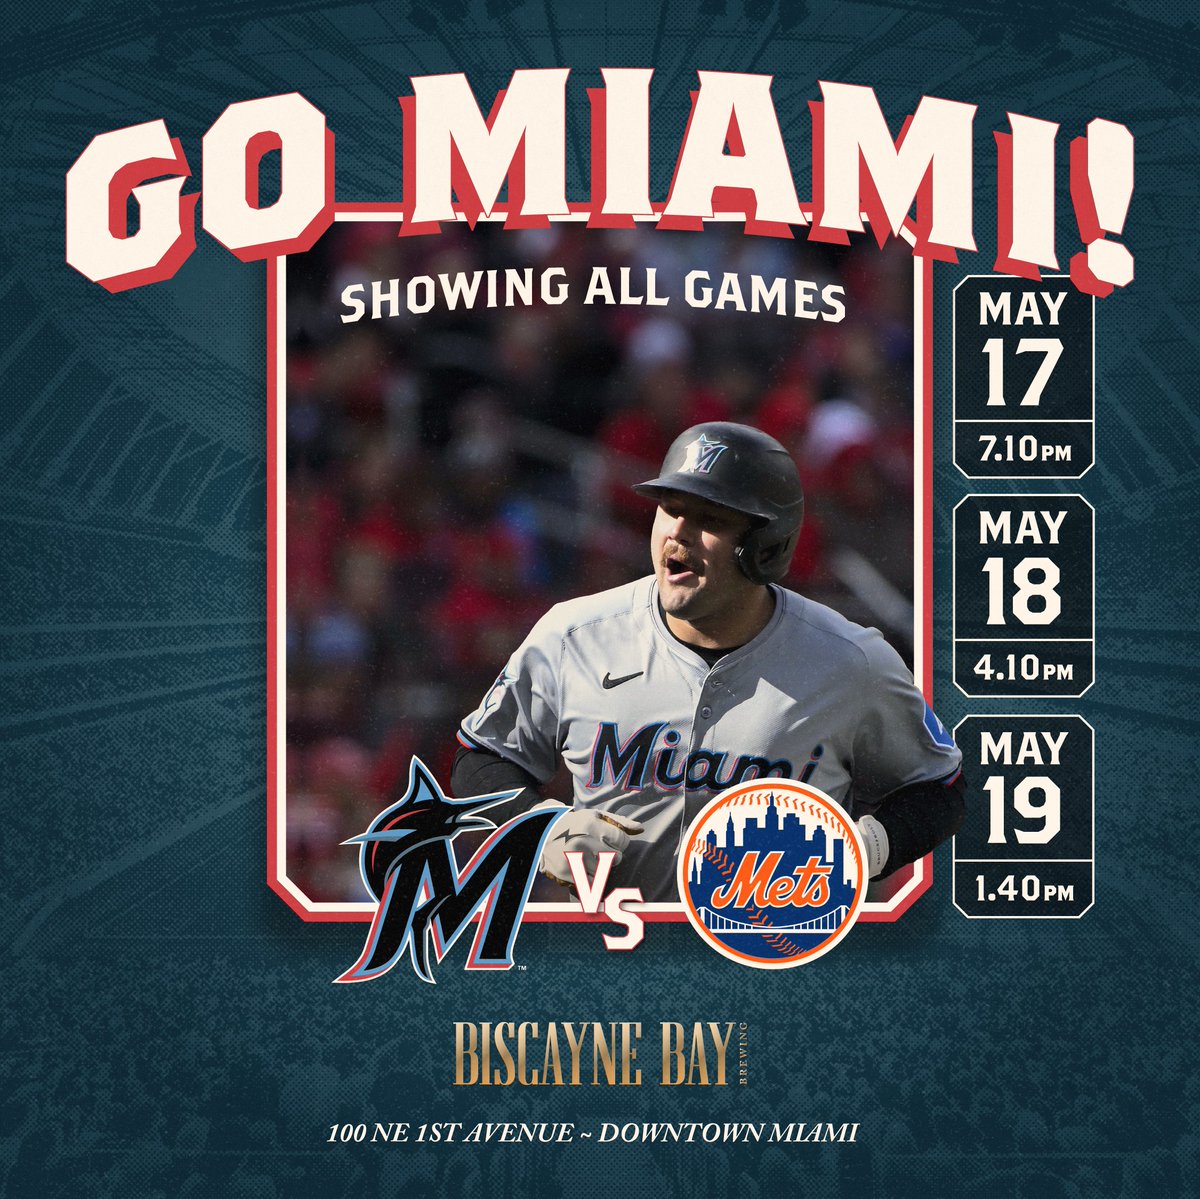 Get hyped to root for your faves!🍻 This weekend, we're airing all the Marlins games ⚾ Let's have a ball! 🎉 #thingstodoinmiami #thingstodoindowntownmiami #HappyHourMiami #brickellliving #downtownmiami #thingstodoinbrickell